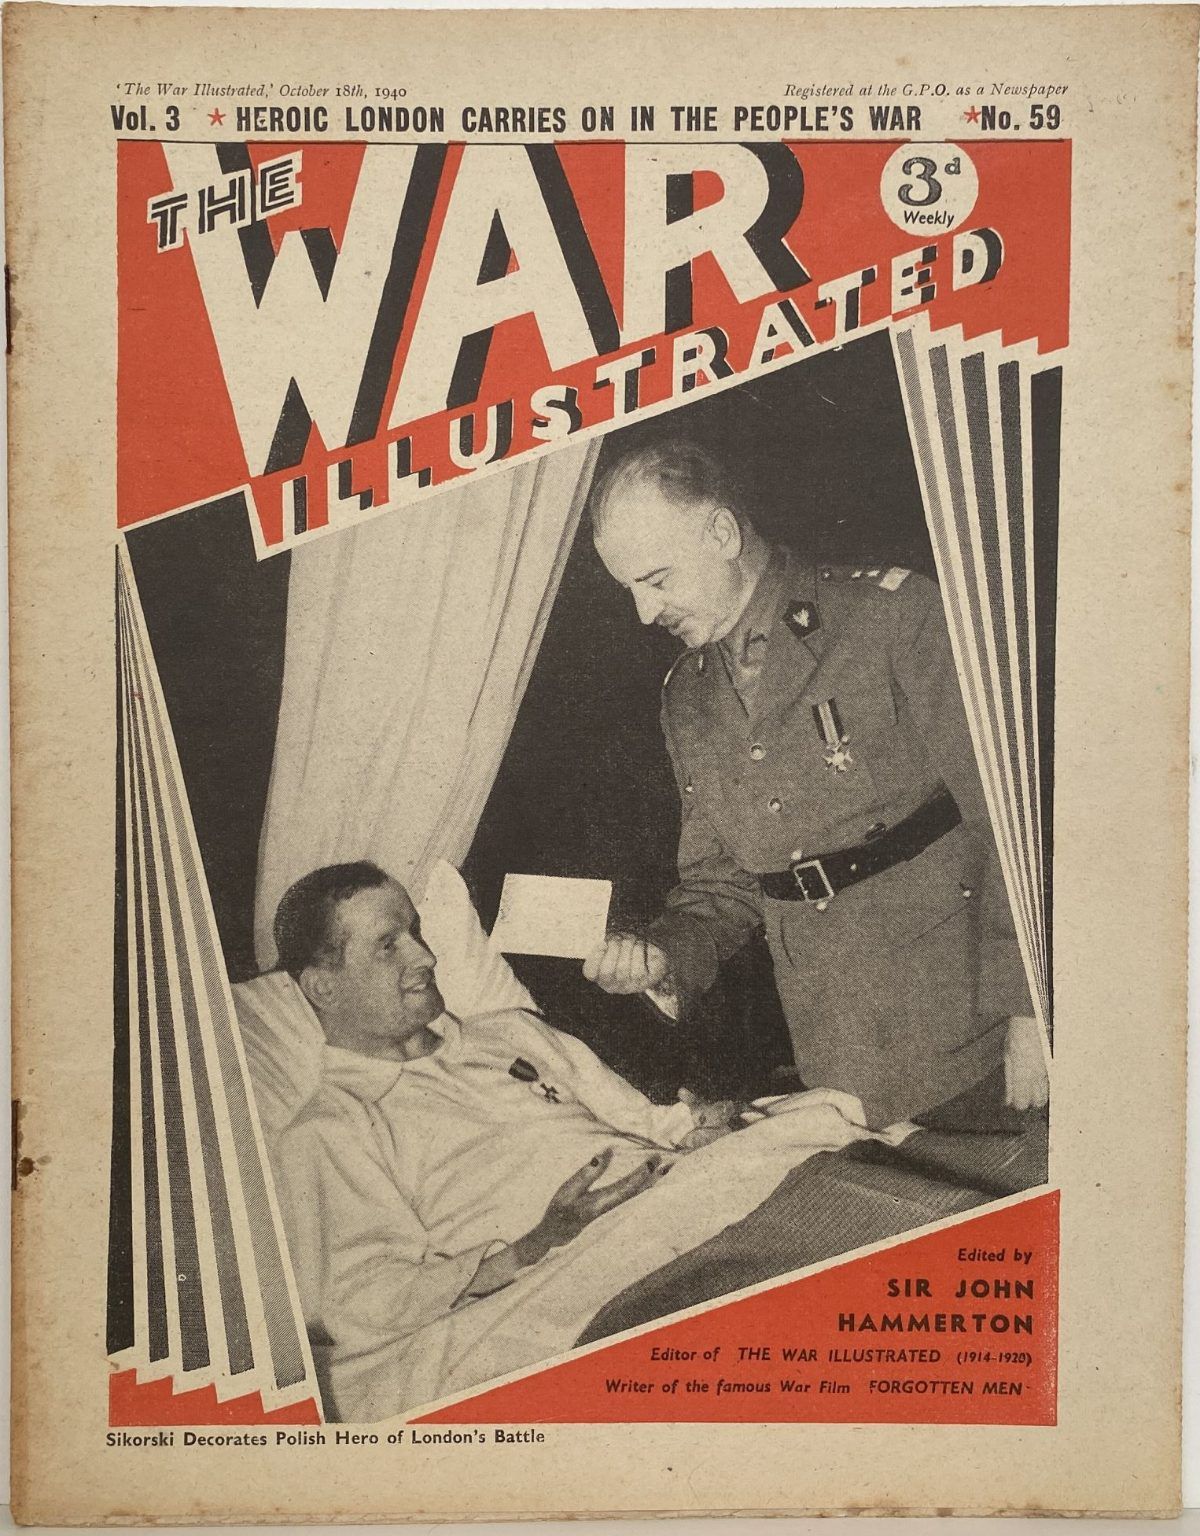 THE WAR ILLUSTRATED - Vol 3, No 59, 18th Oct 1940